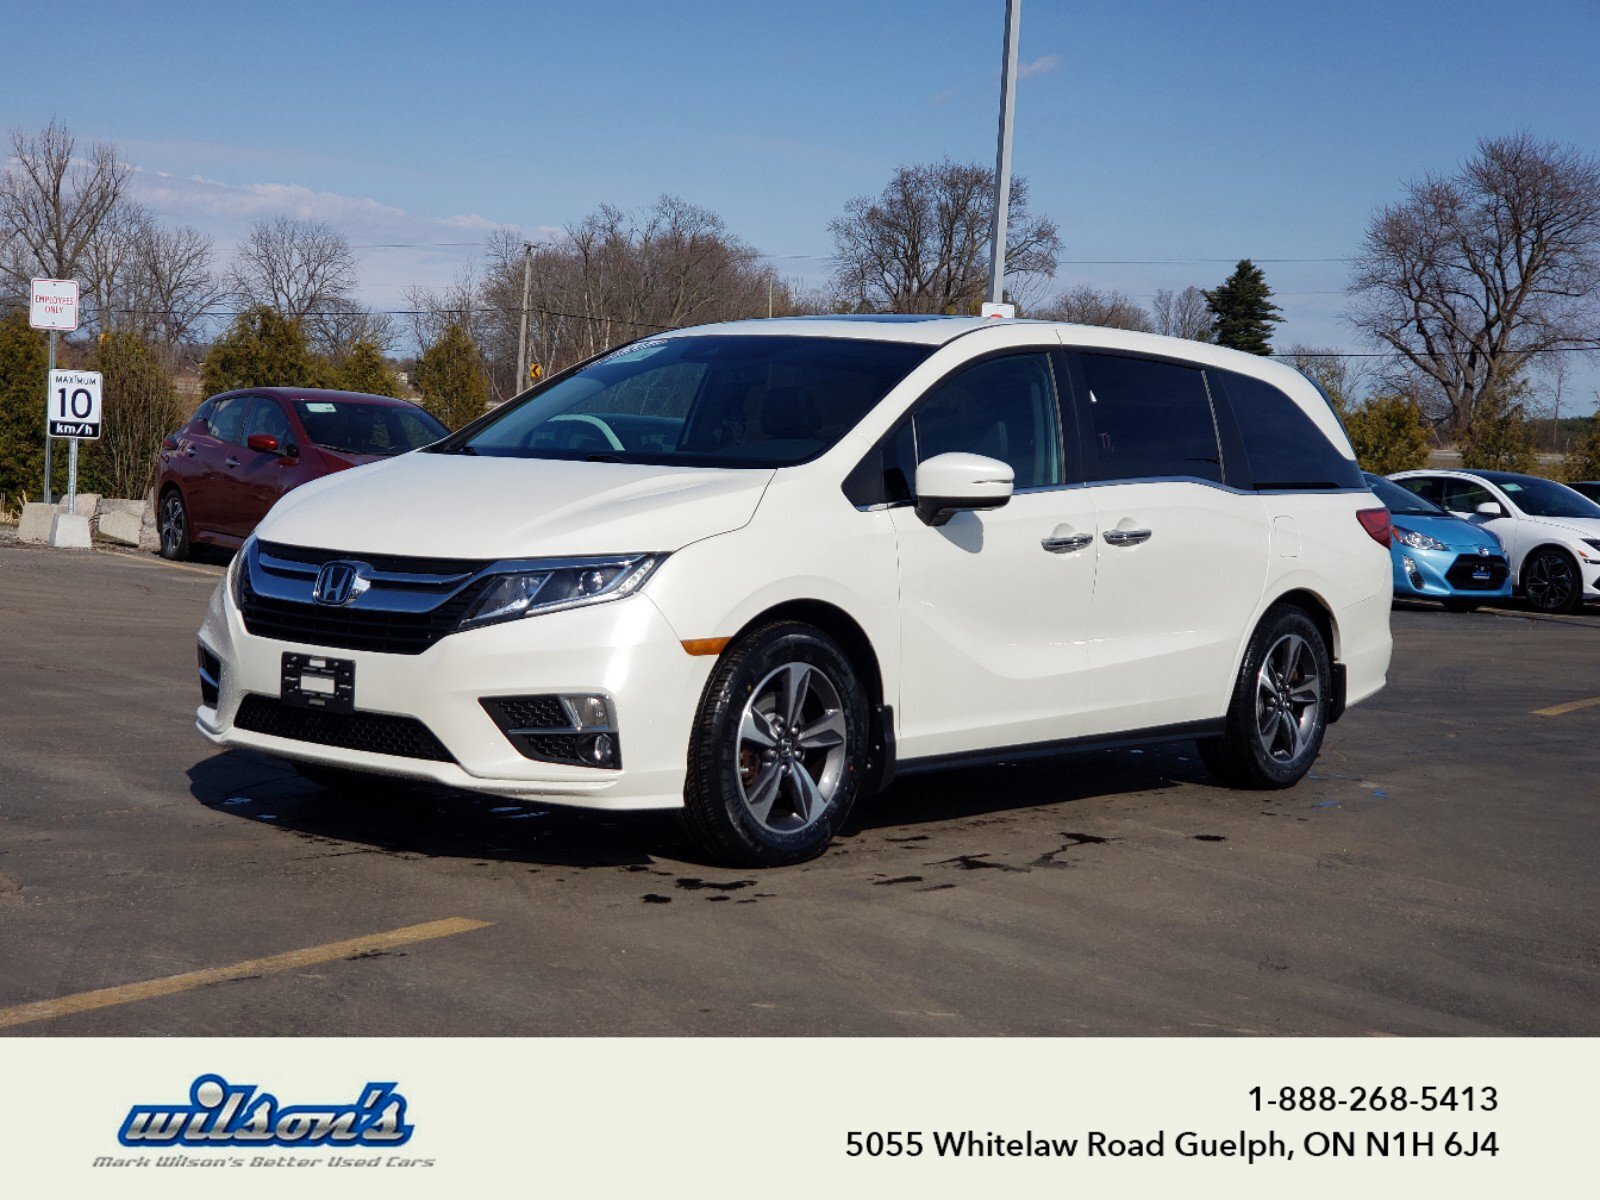 2019 Honda Odyssey EX-L RES, DVD, Leather, Sunroof, CarPlay + Android